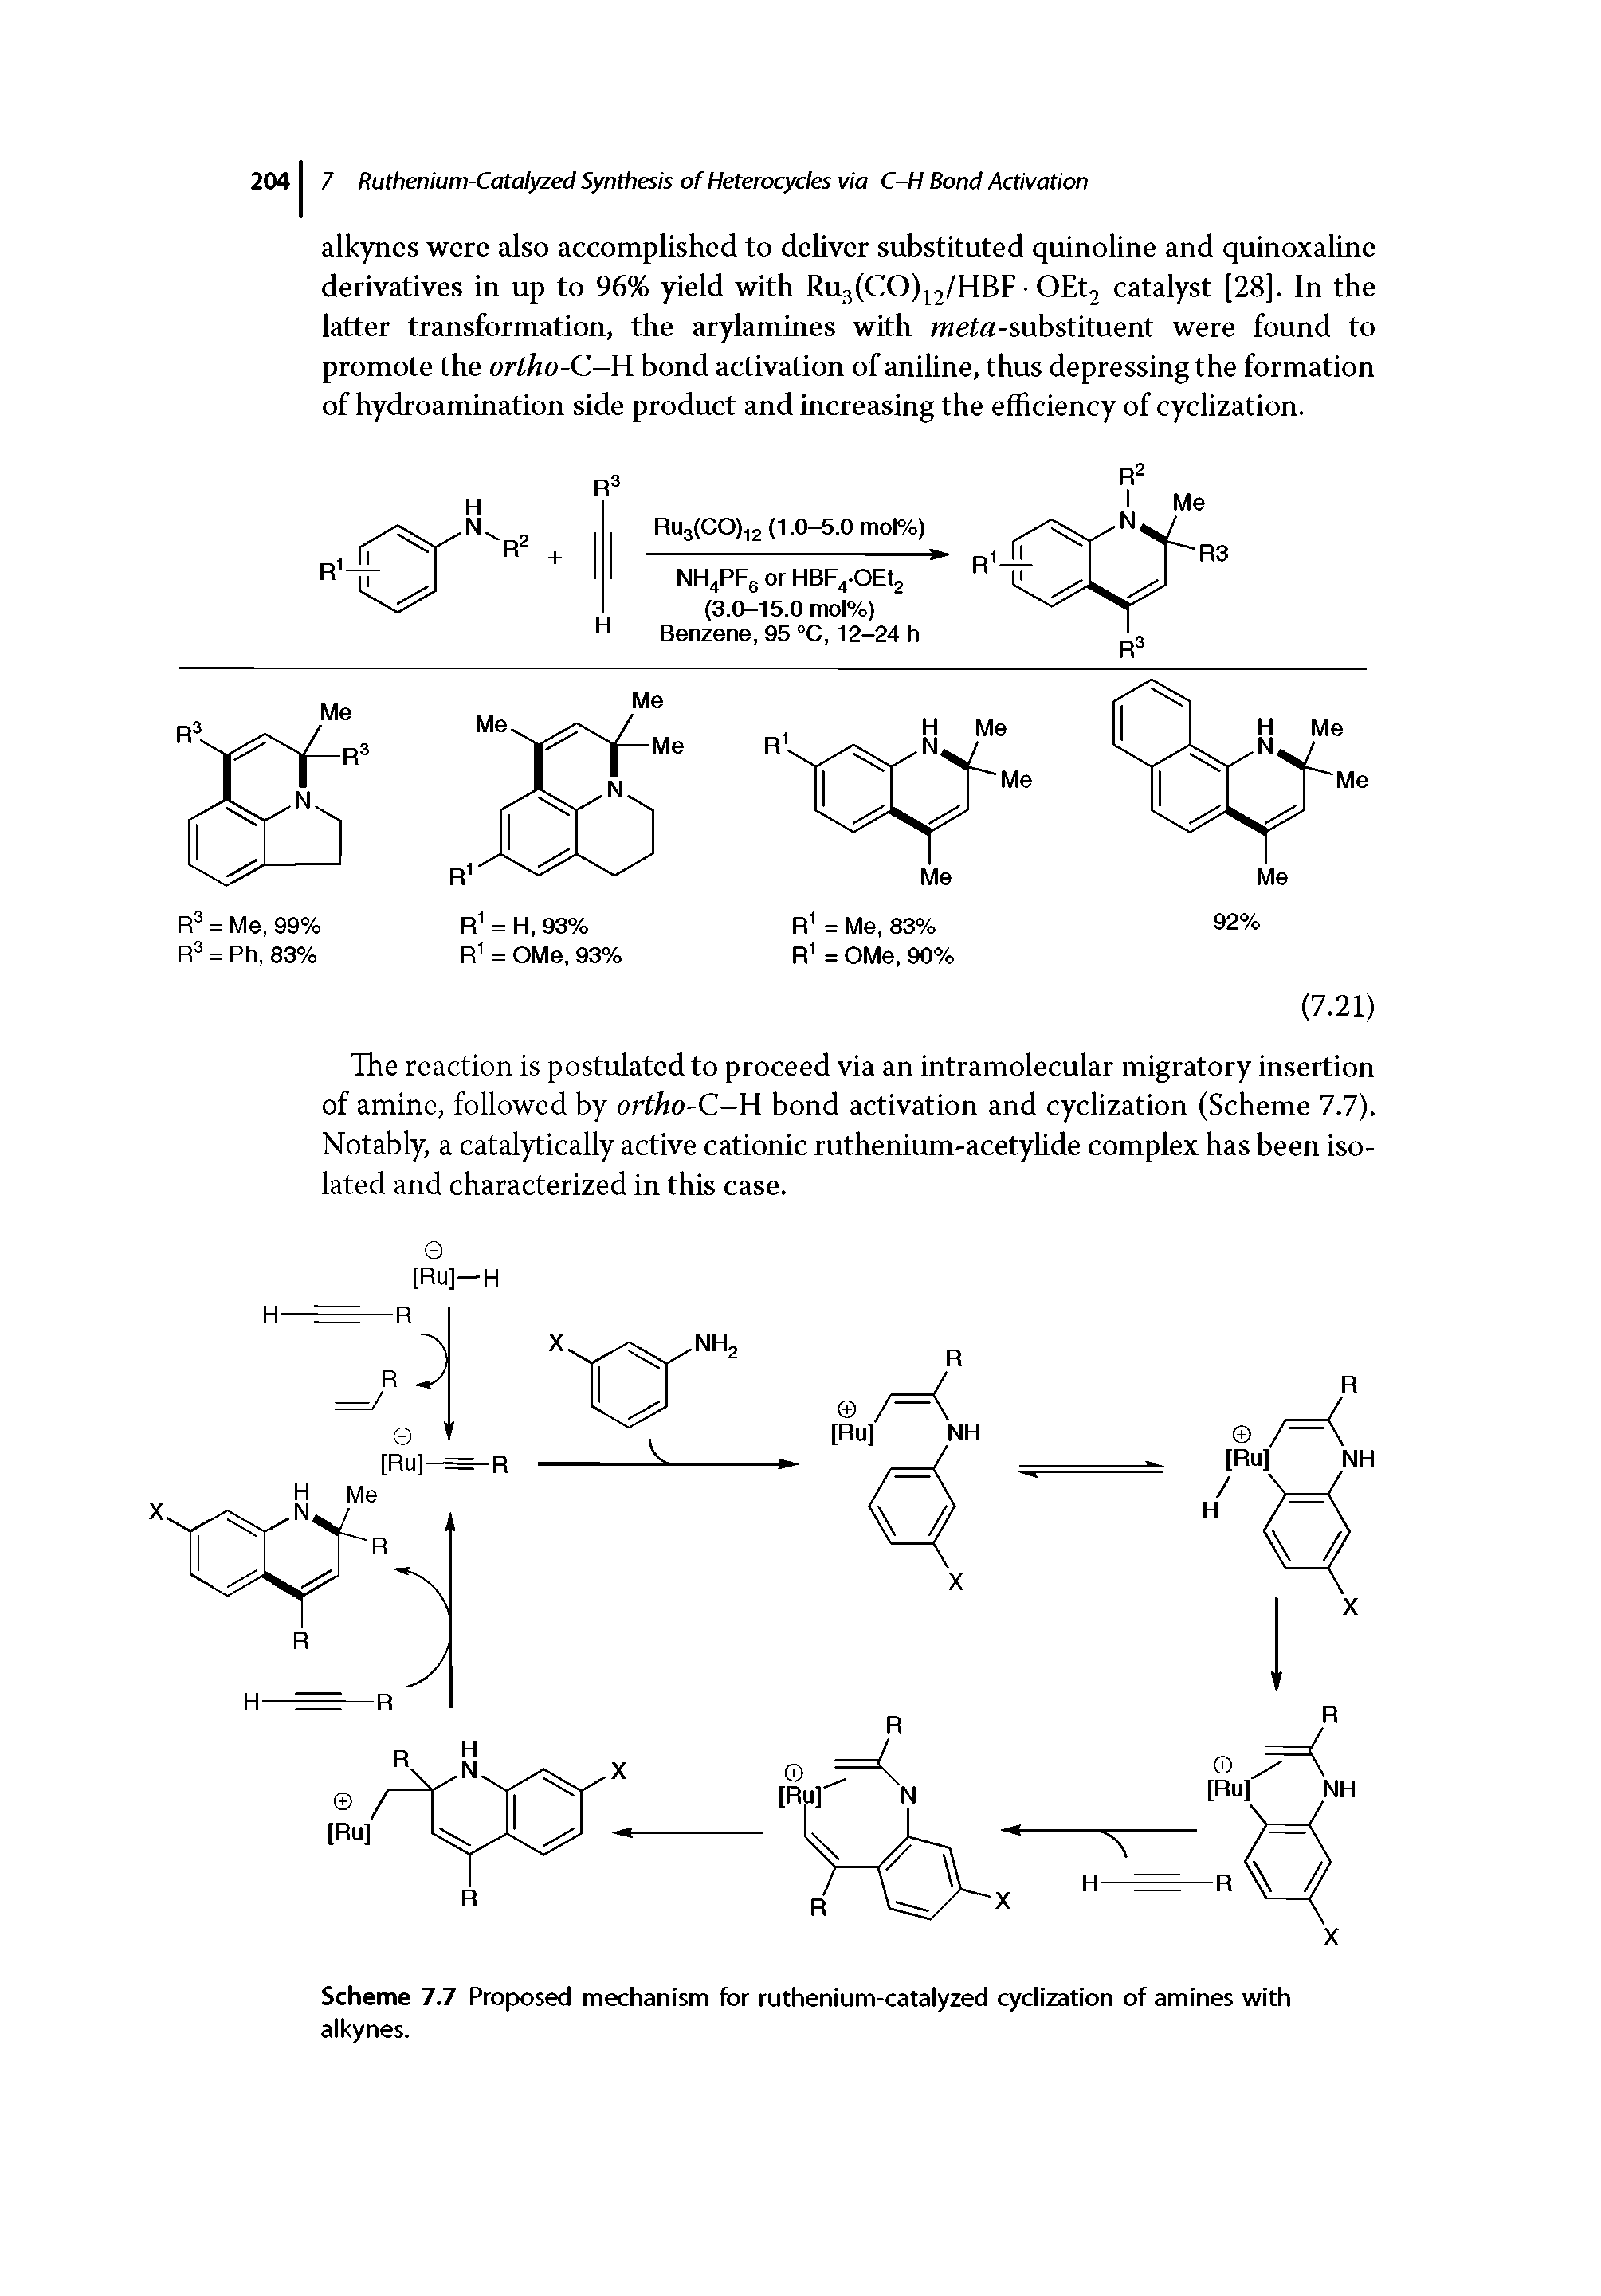 Scheme 7.7 Proposed mechanism for ruthenium-catalyzed cyclization of amines with alkynes.